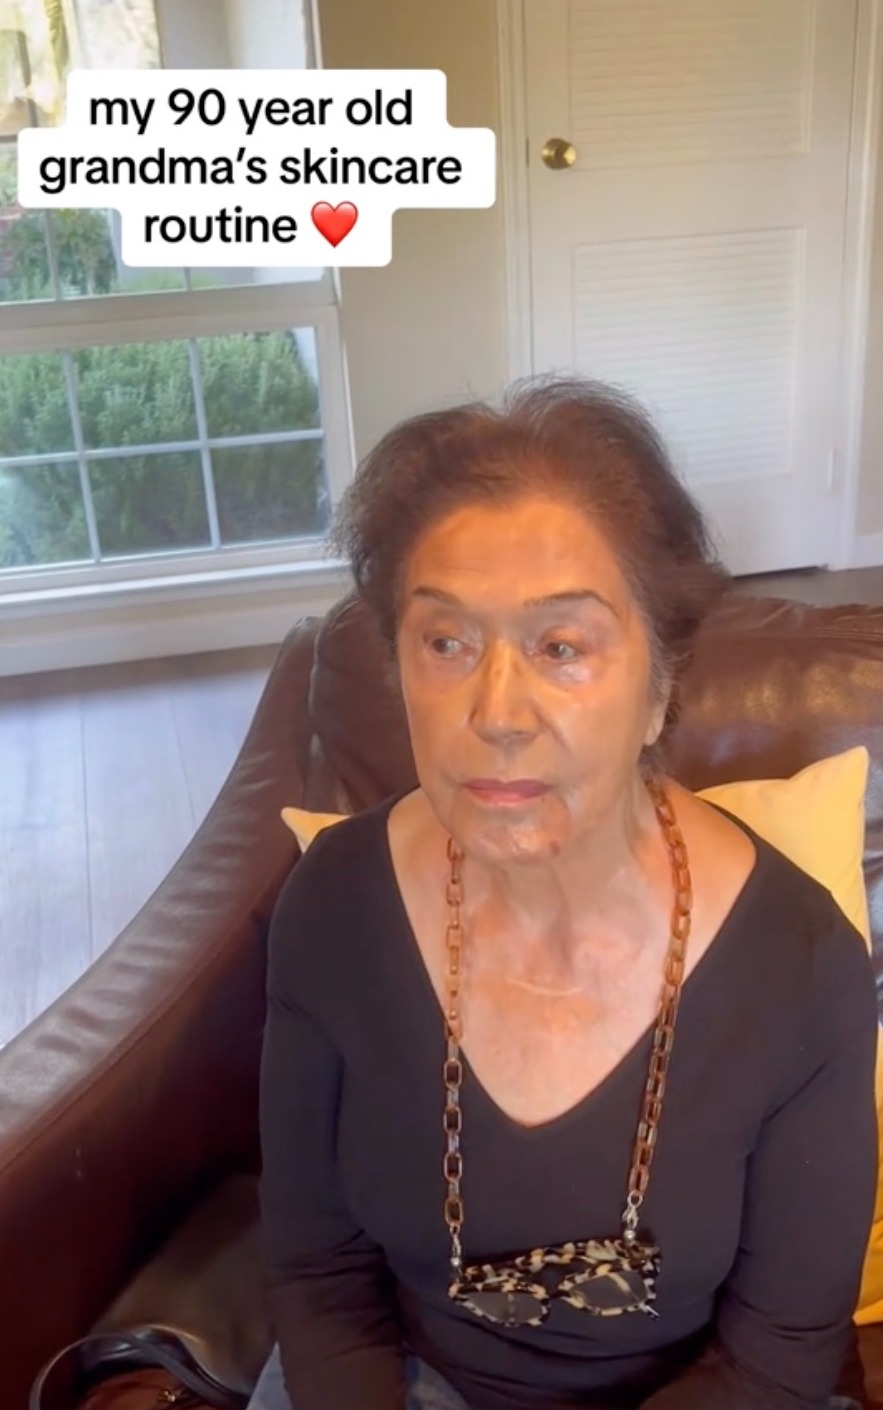 My 90-year-old grandma is always complimented on her flawless skin, she uses three cheap products from the same brand